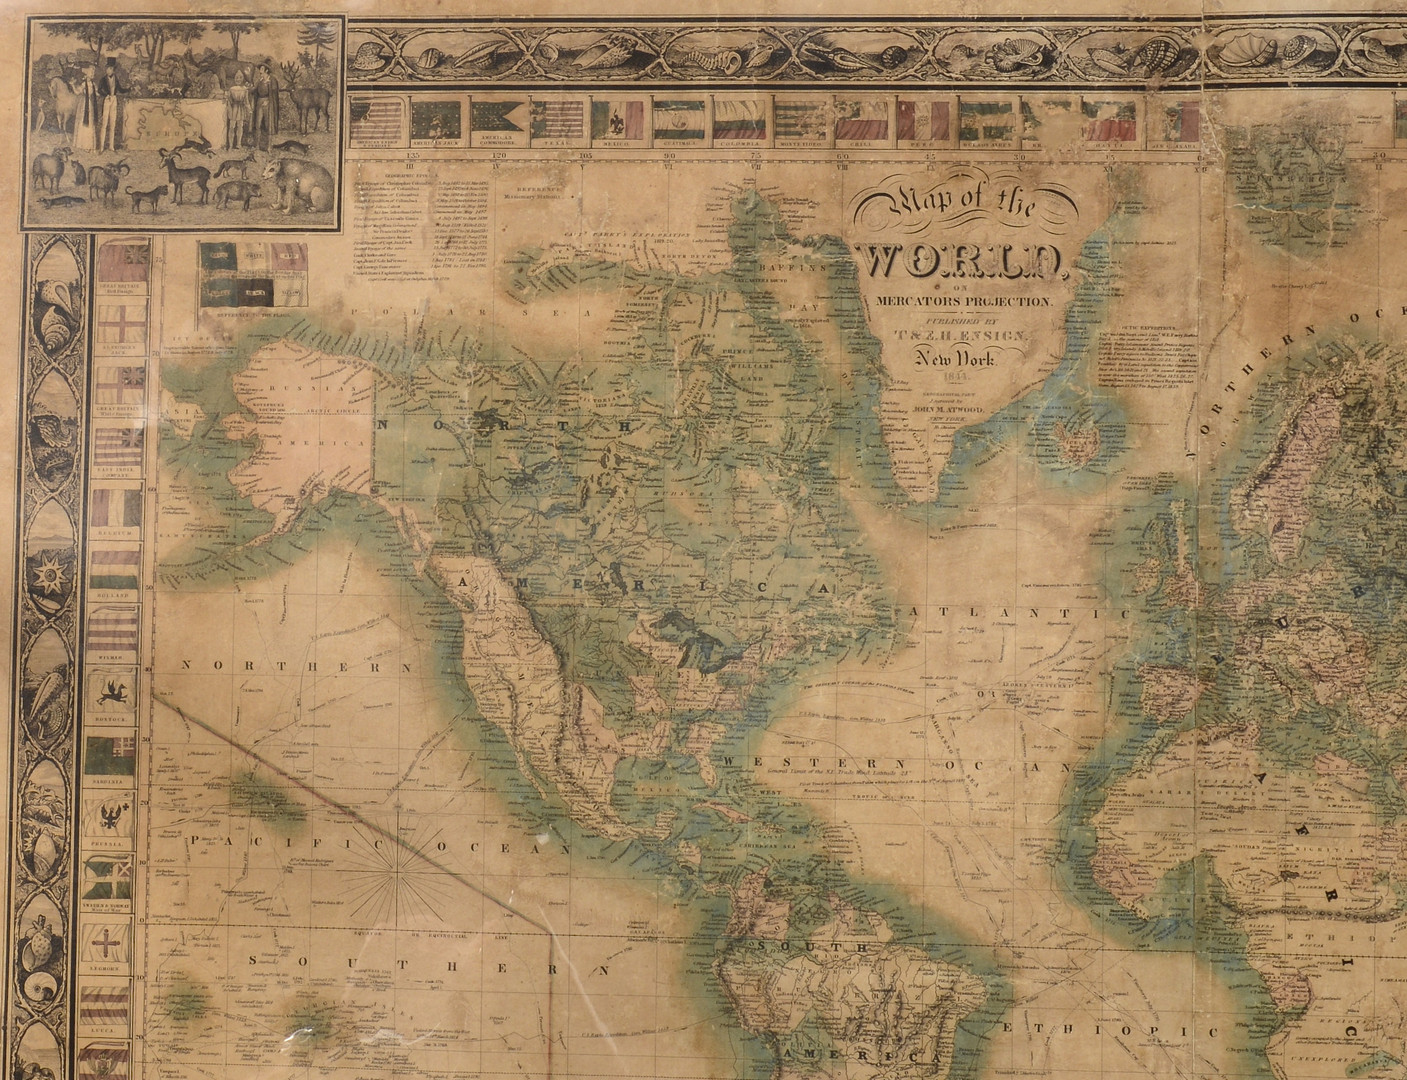 Lot 404: Ensign Map of the World